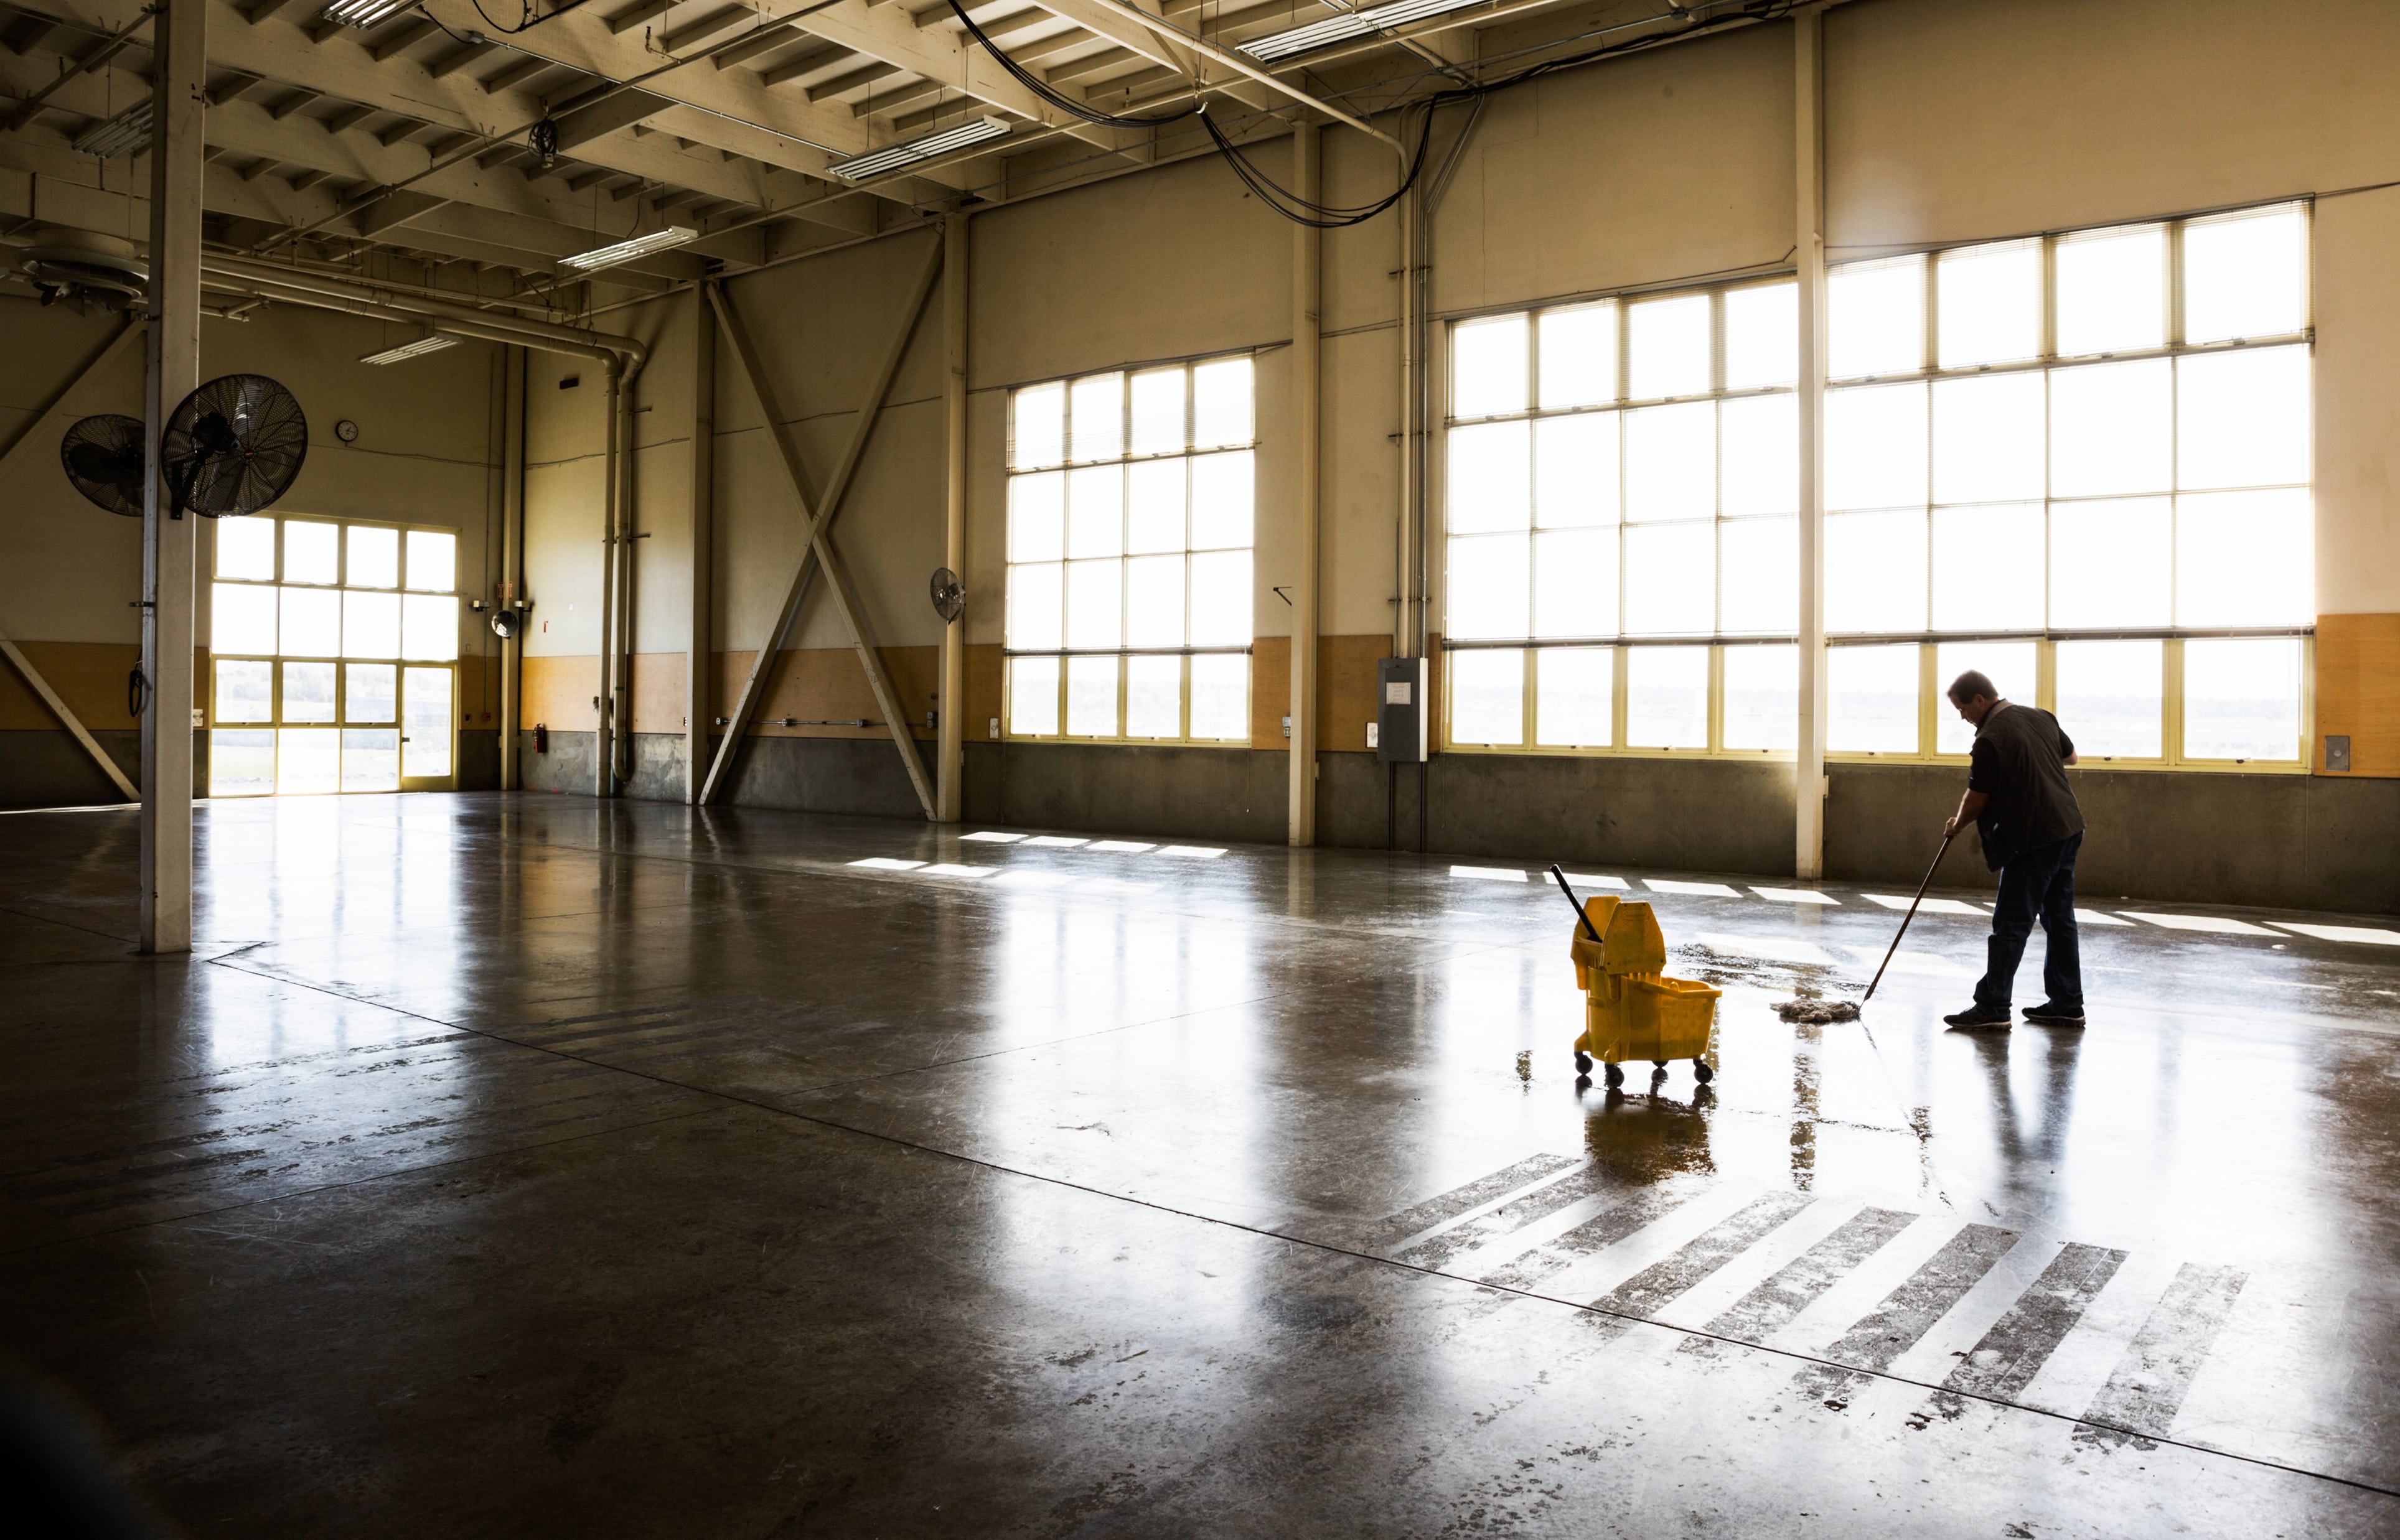 warehouse cleaning services include sweeping, mopping and floor polishing for hard surface floors